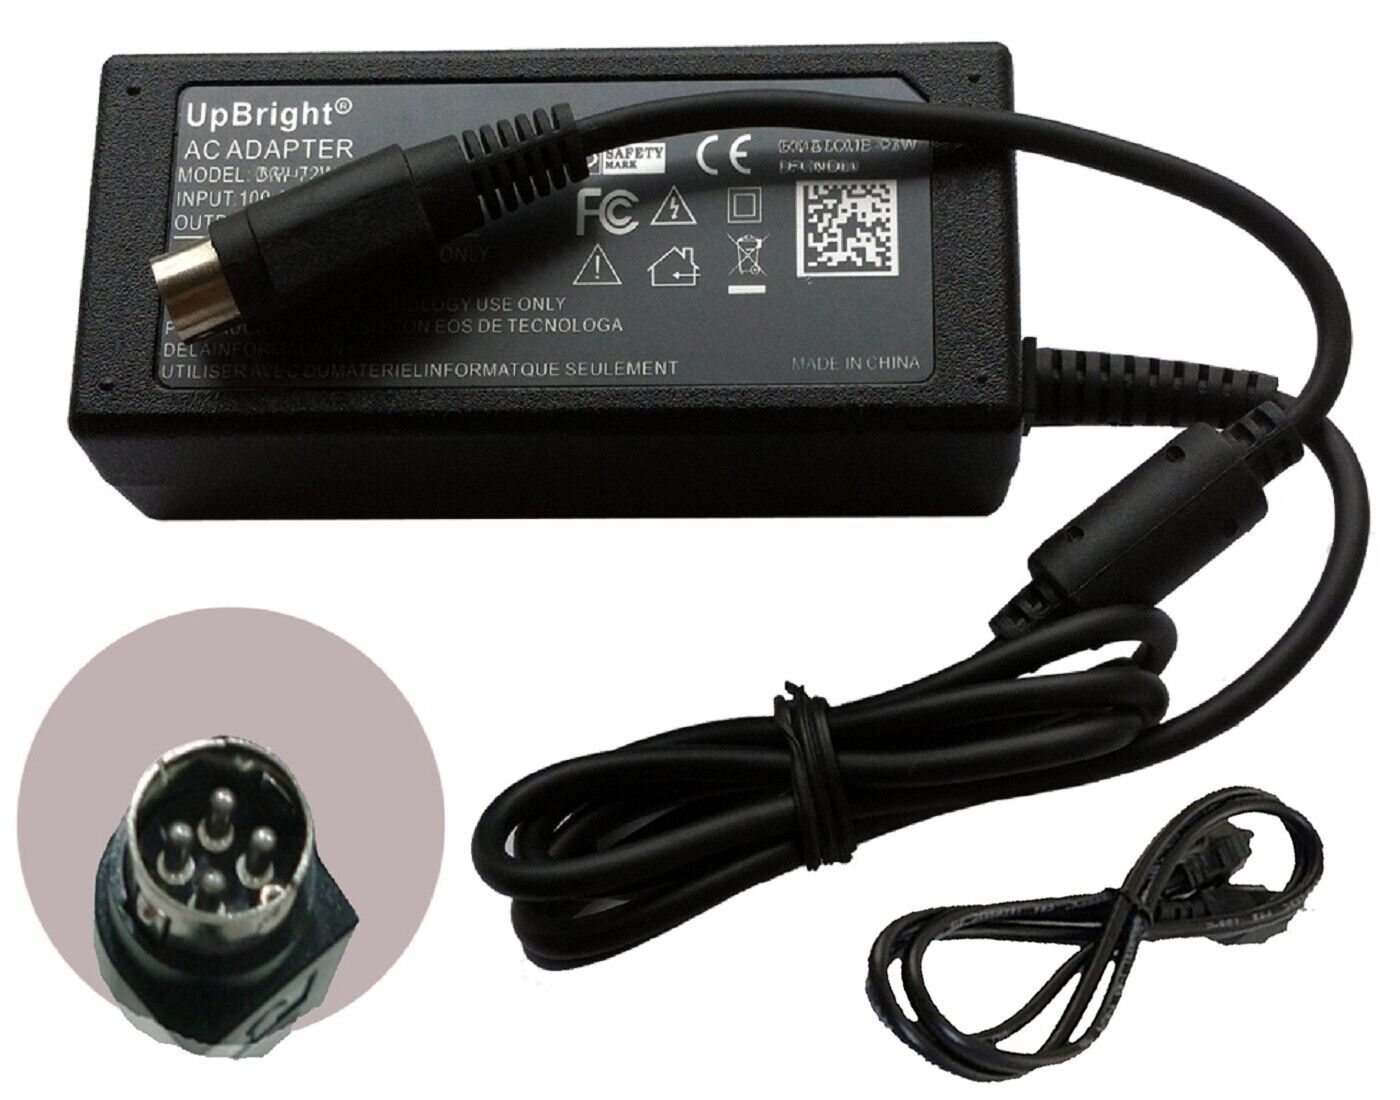 AC Adapter For Avid Pro Tools S3 9100-65452 Control Surface Power Supply Charger